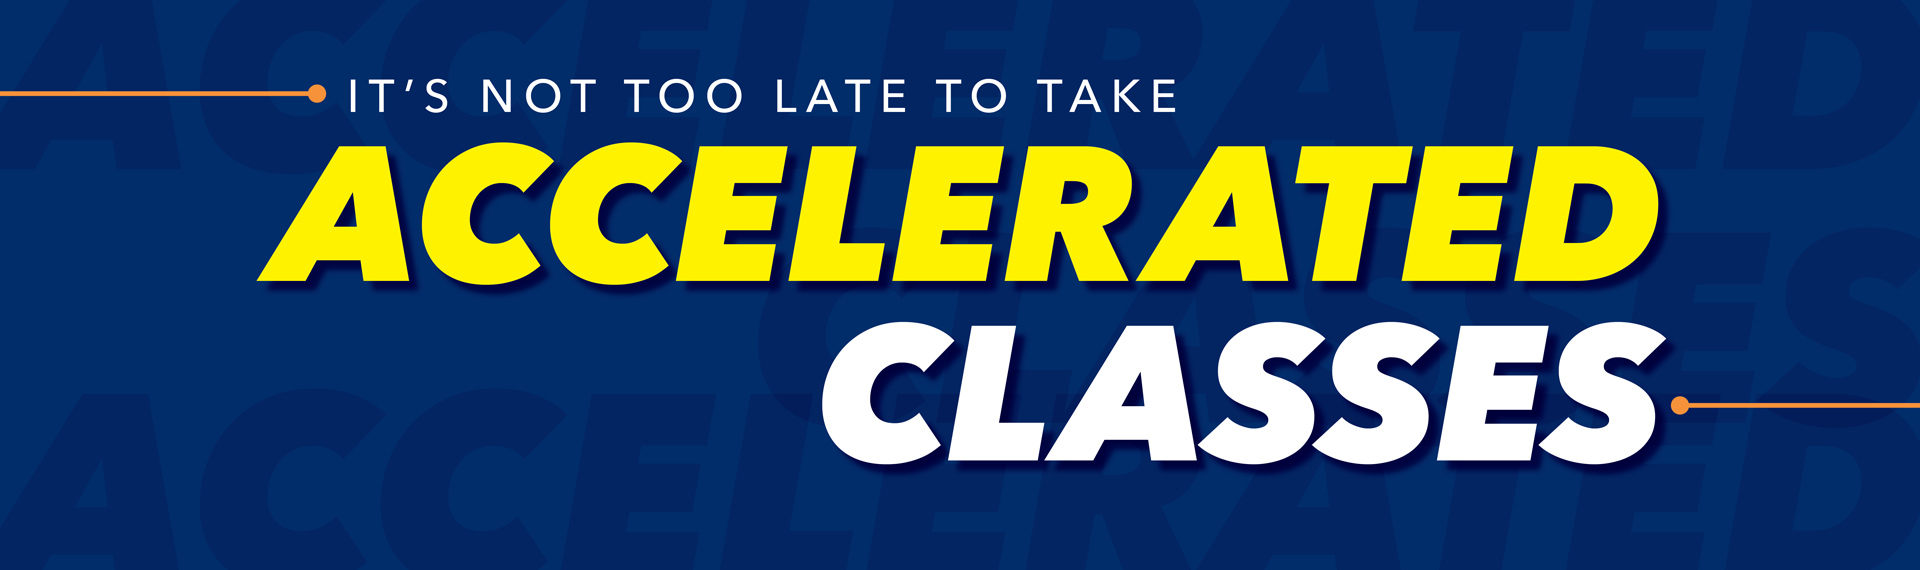 It's not too late to take Accelerated Classes